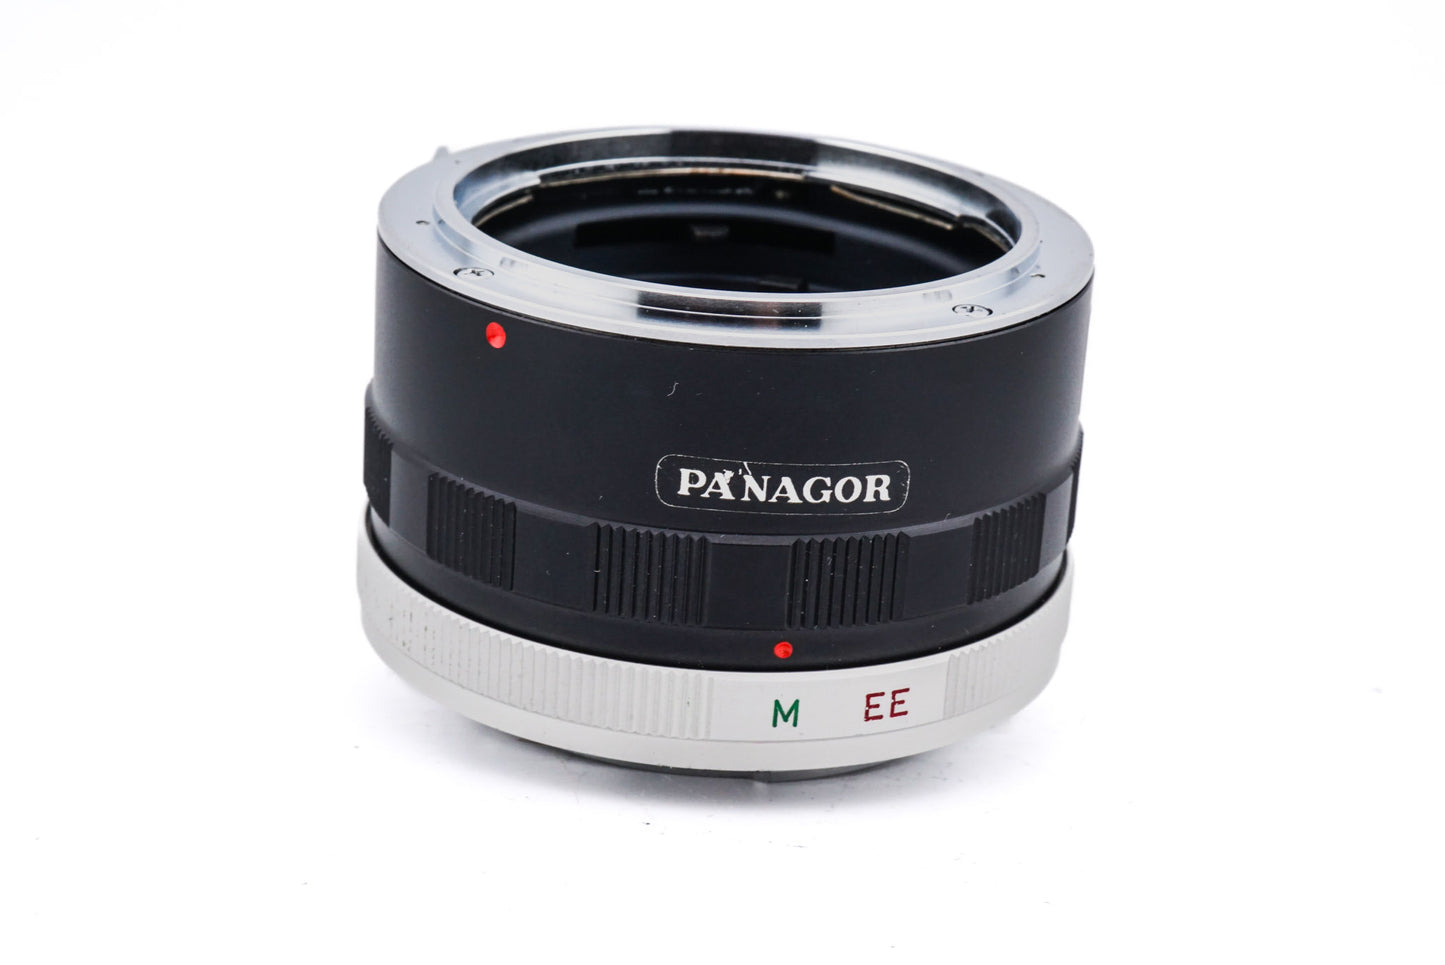 Panagor 36mm Automatic Extension Tube